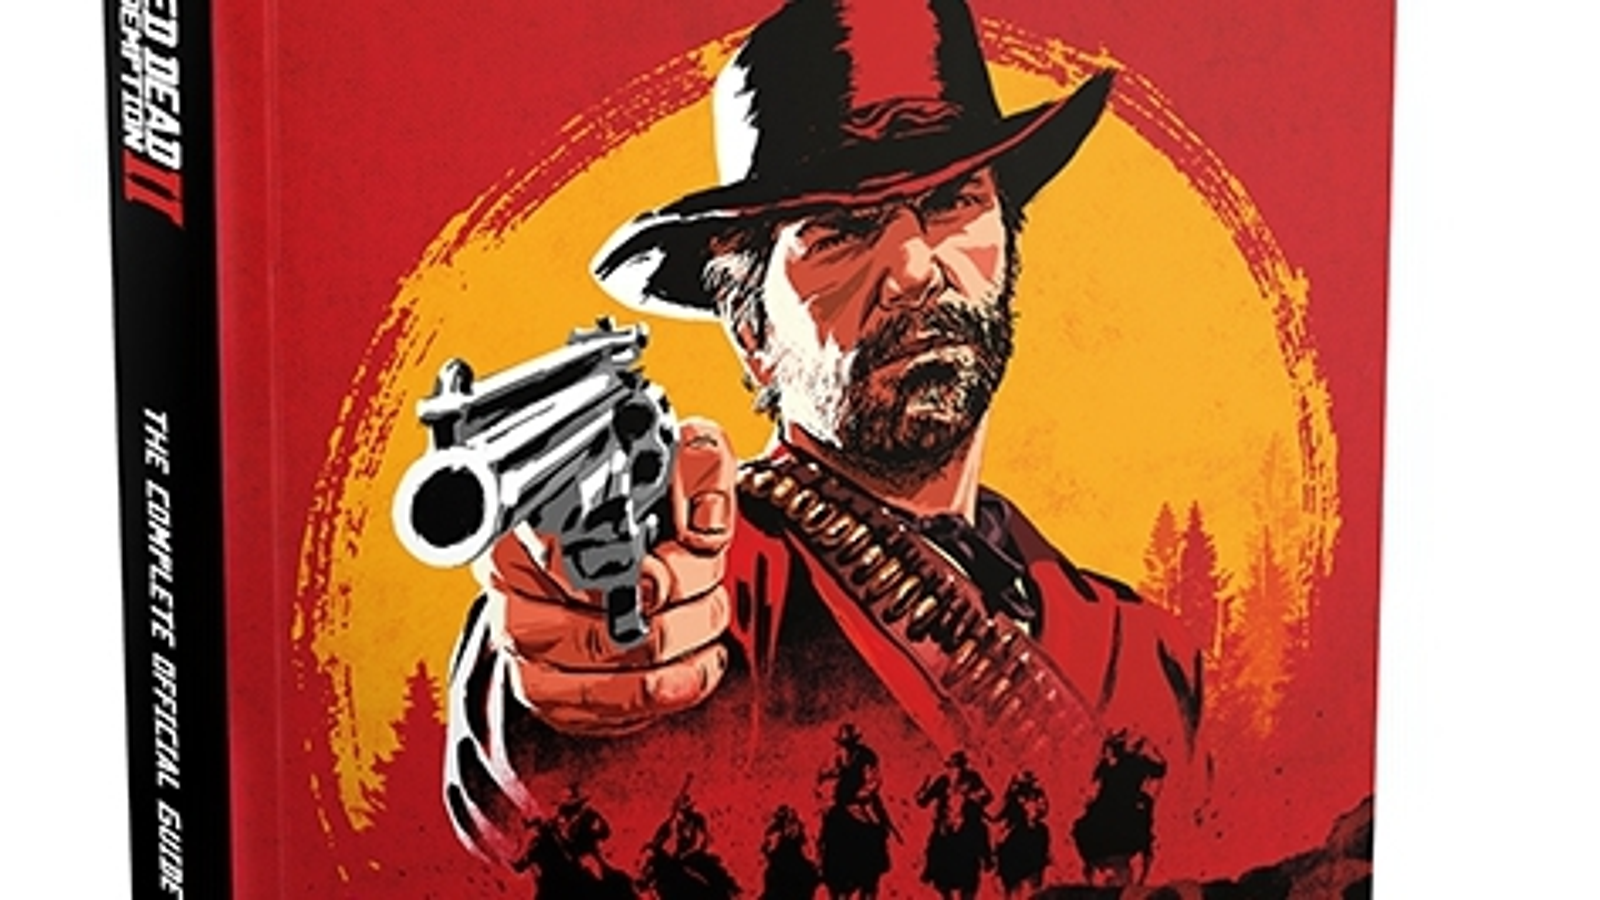  Red Dead Redemption 2 - O Guia Oficial Completo